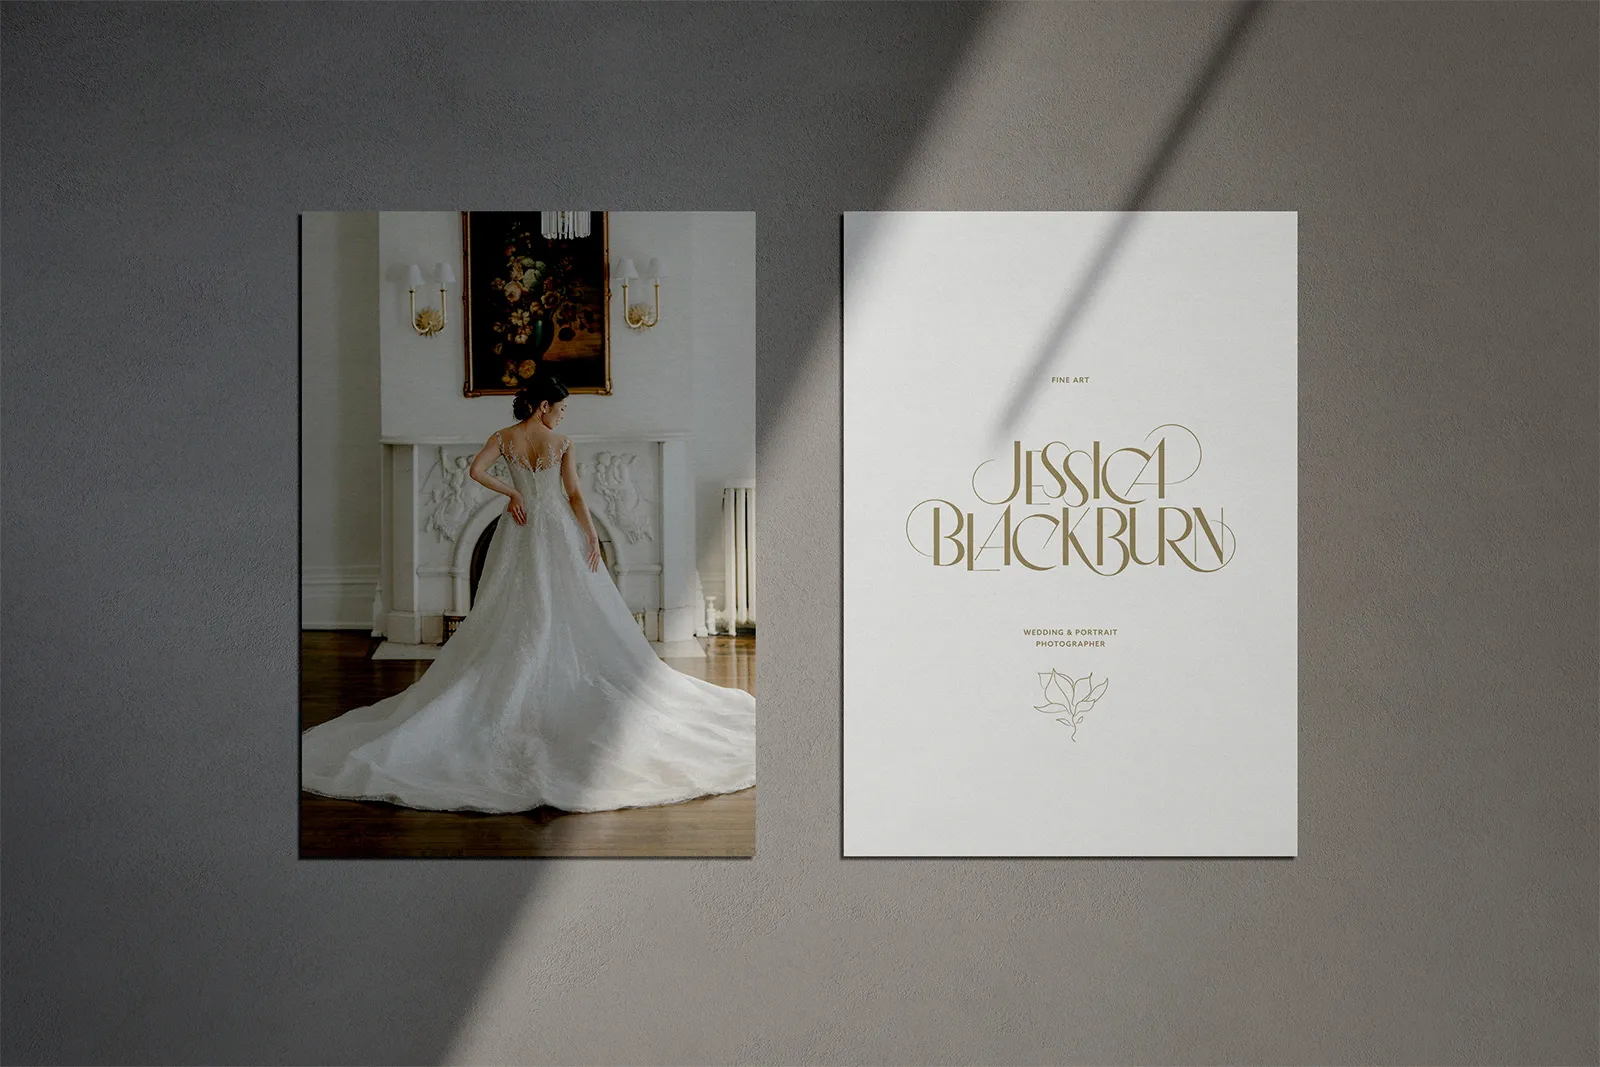 A hand-lettered logo design for luxury wedding photographer